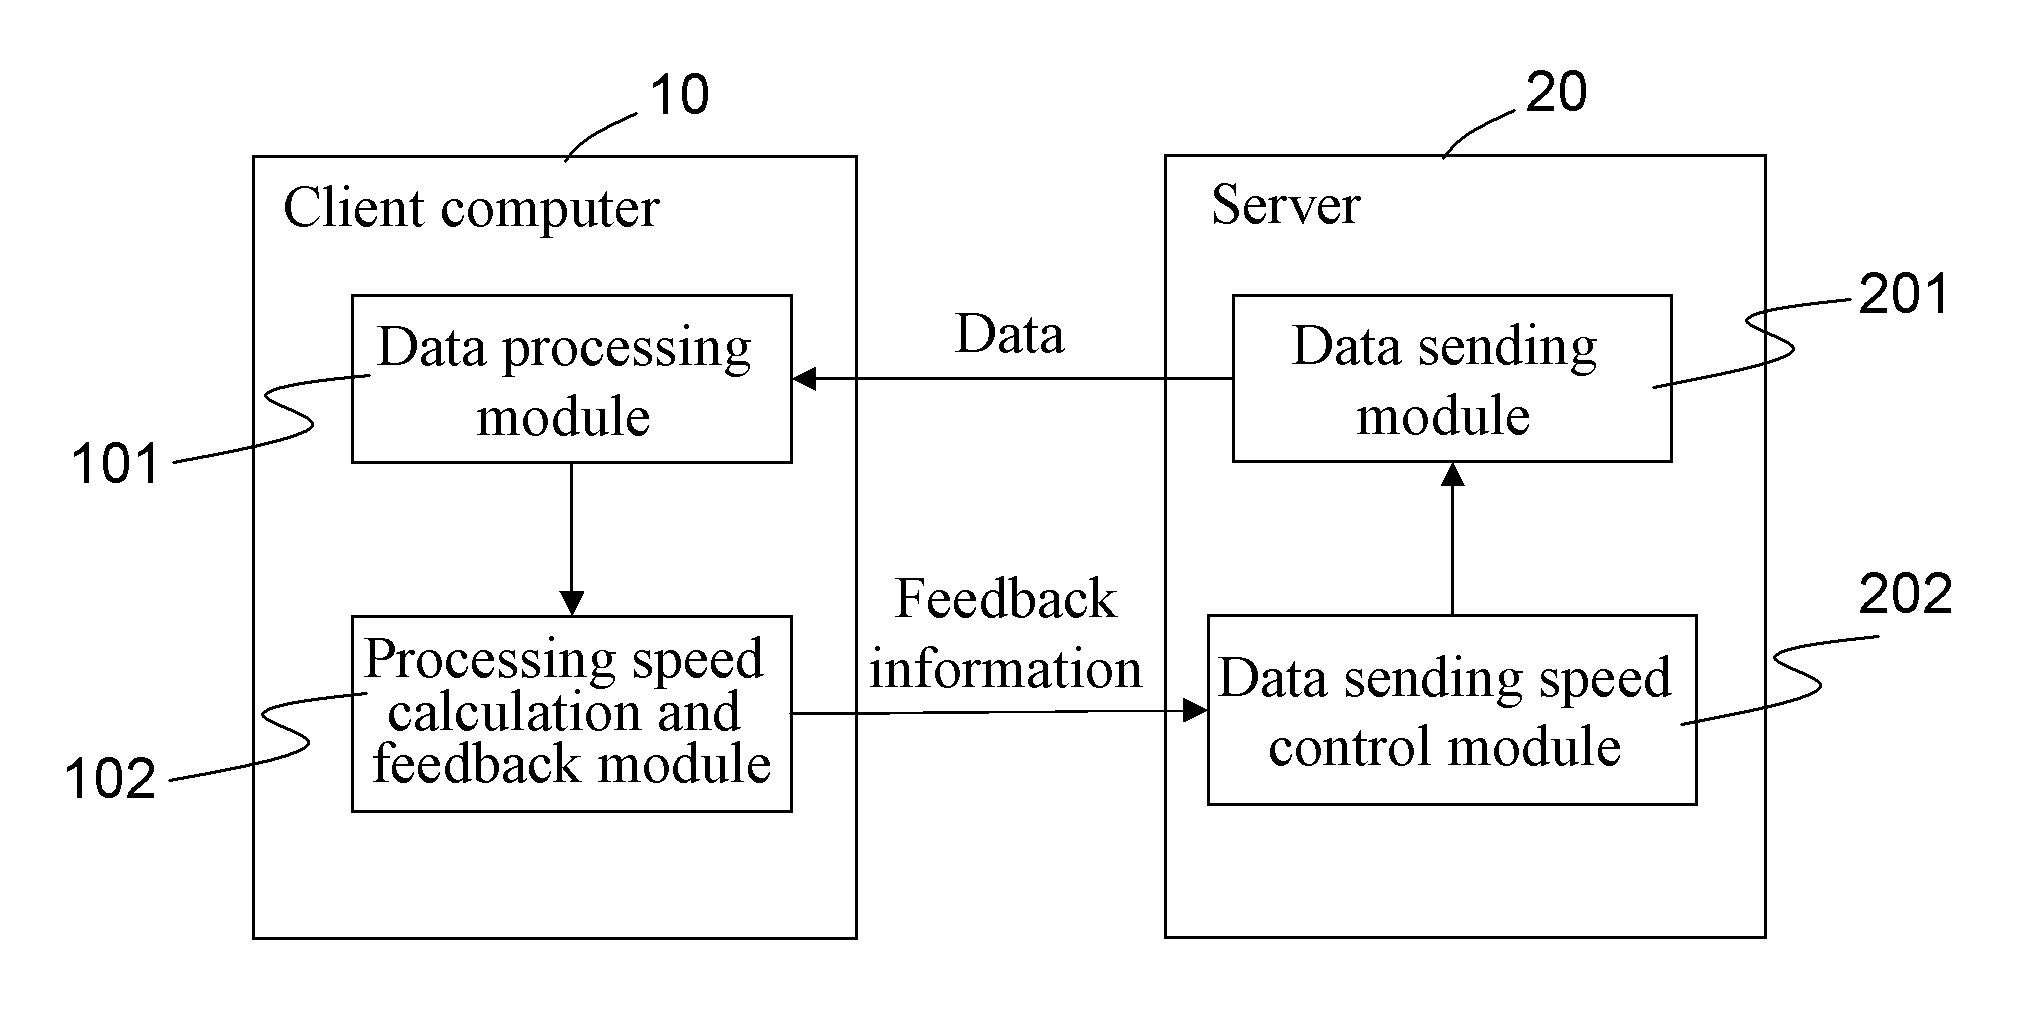 Method of adjusting network data sending speed according to data processing speed at client